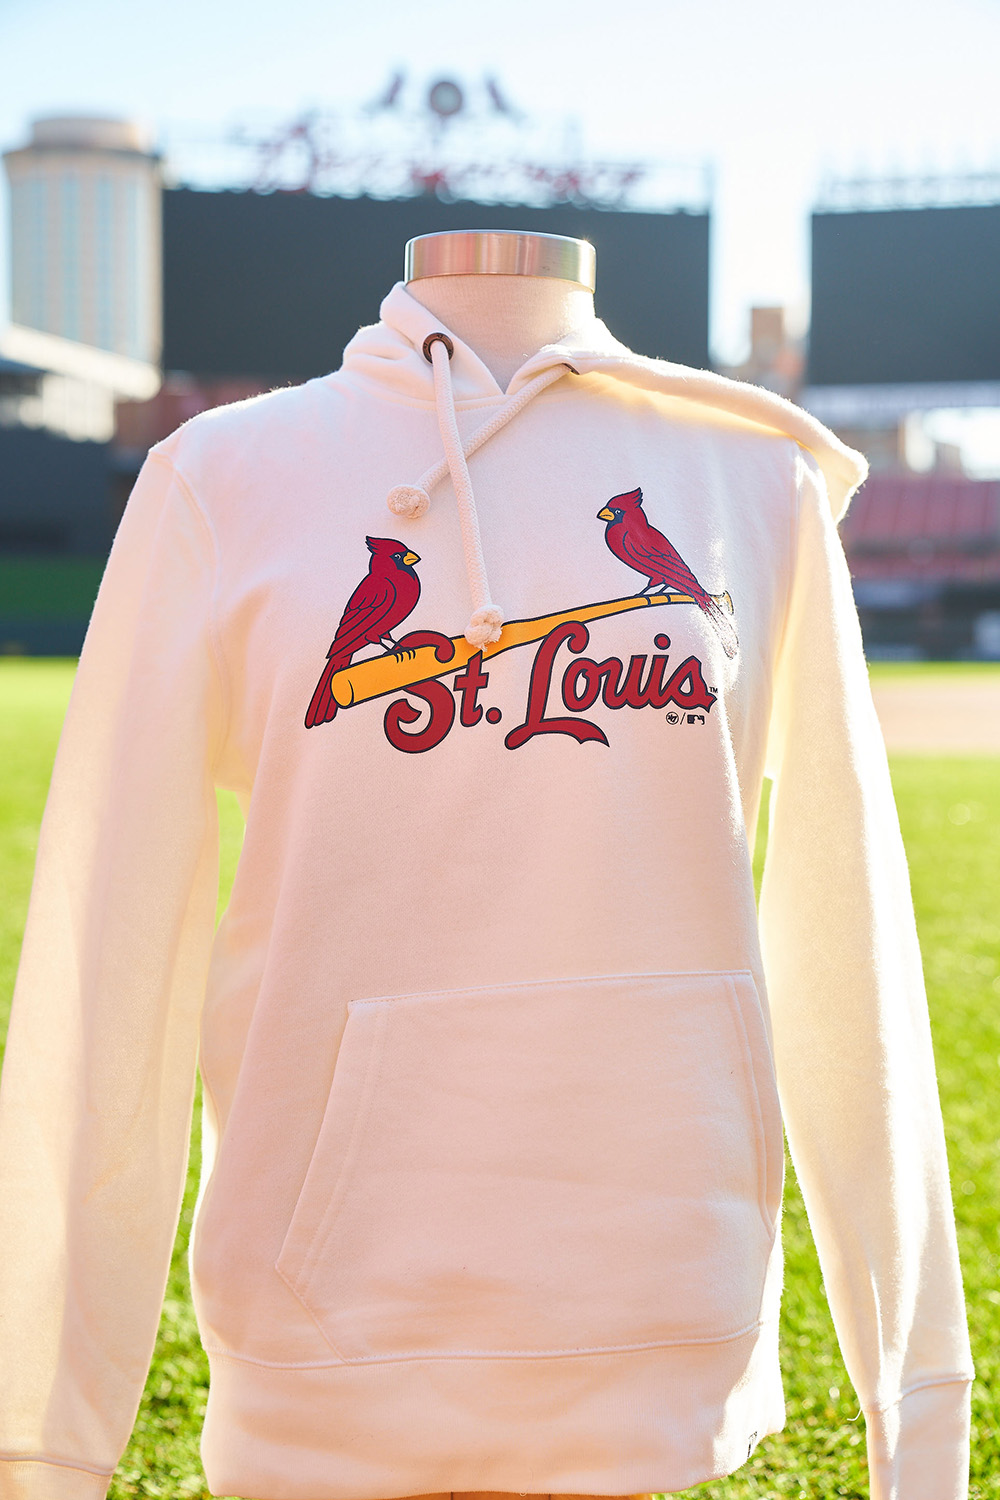 St. Louis Cardinals on X: Get yours exclusively at the Official Cardinals  Team Store at Busch Stadium, @CardsAuthentics & the Cardinals Majestic  Store at @BPVSTL through 11/26. Each purchase comes with a